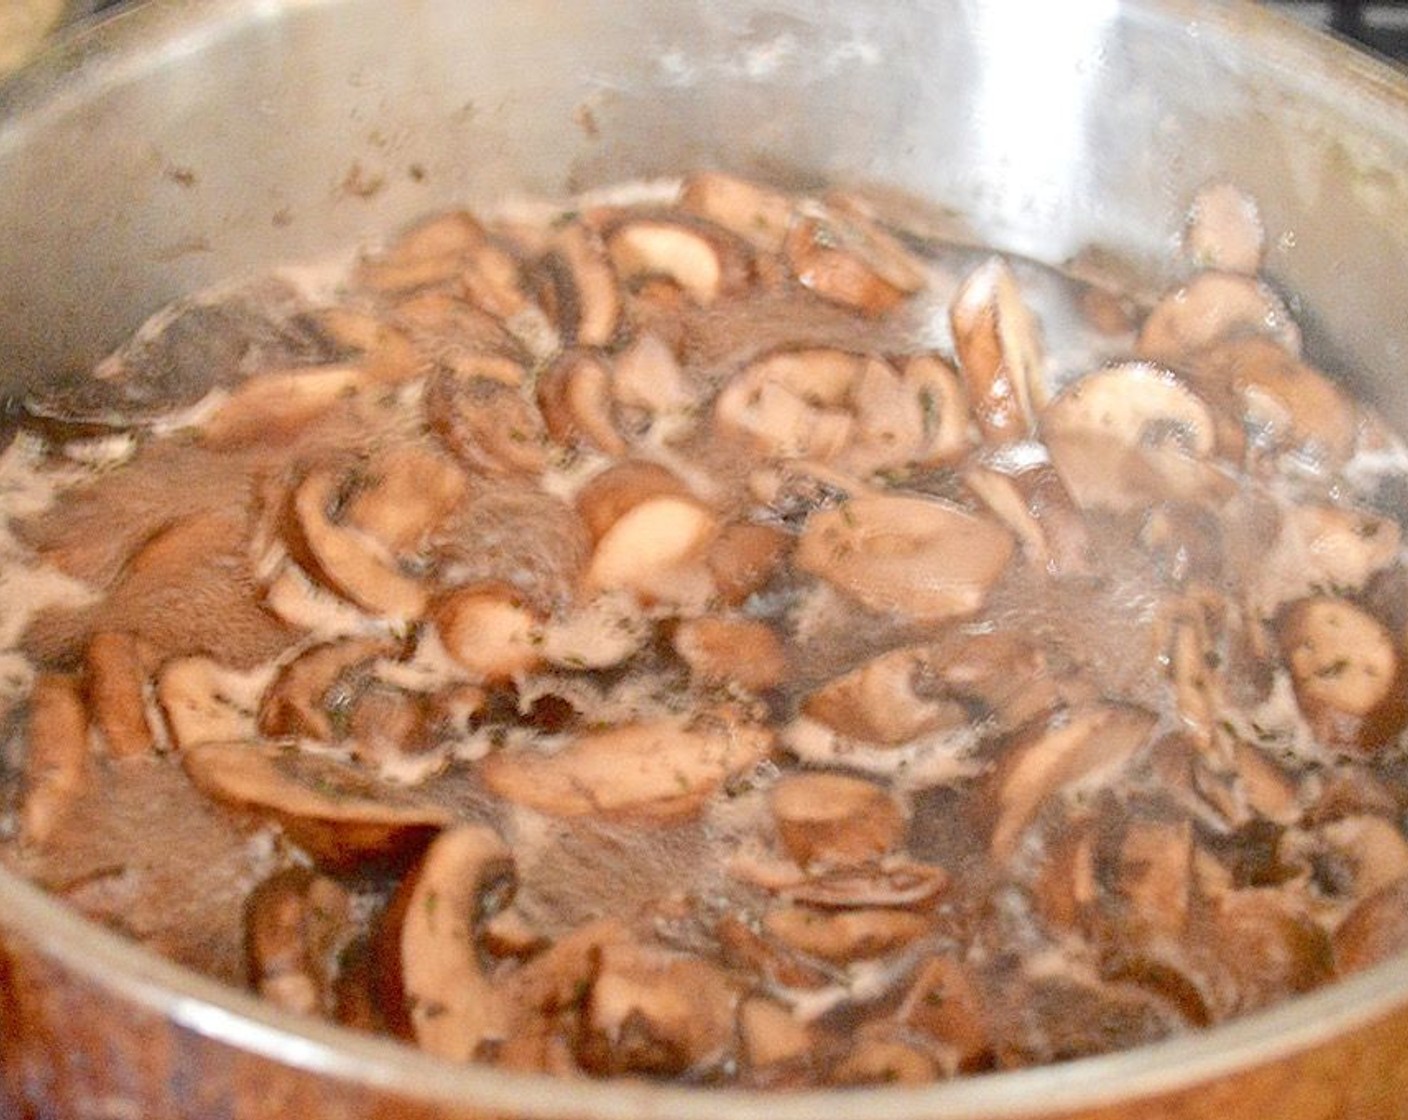 step 3 Add the Red Wine (1 cup) and let the mushrooms absorb it for 5 minutes.